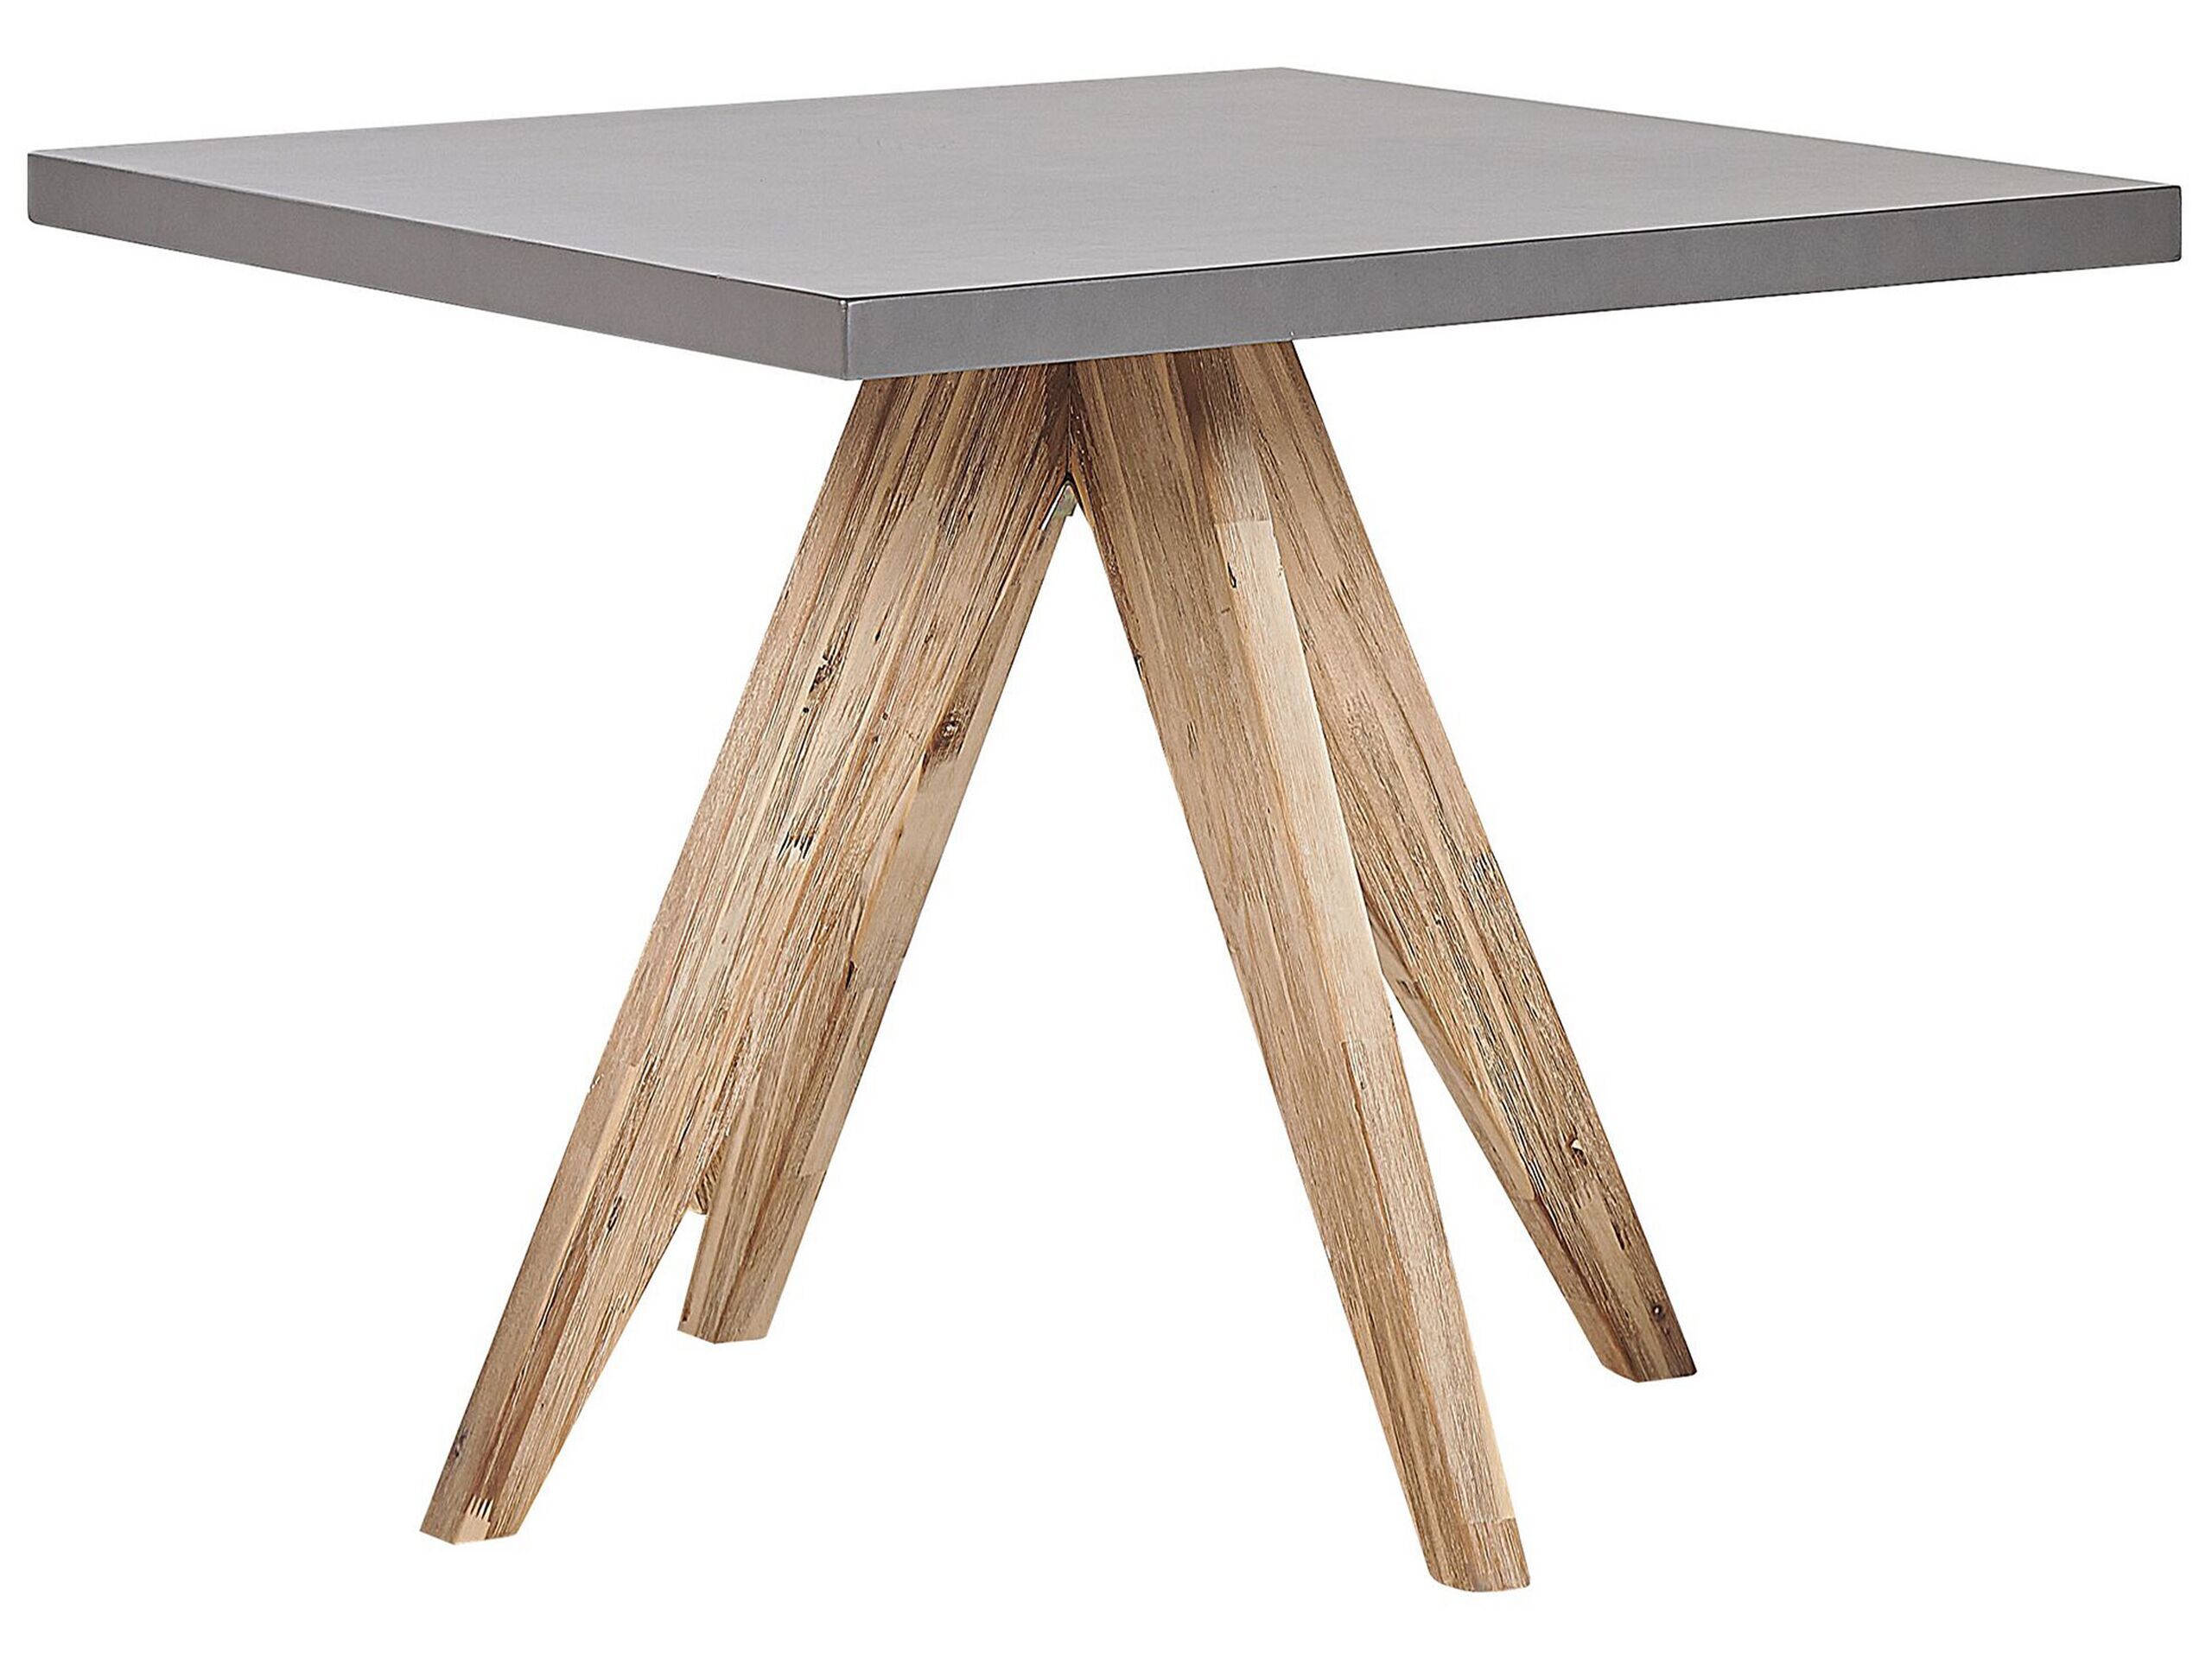 Outdoor Dining Table Grey Concrete Tabletop Light Wooden Legs Acacia 4  People Capacity Square 90 X 90 Cm Beliani 